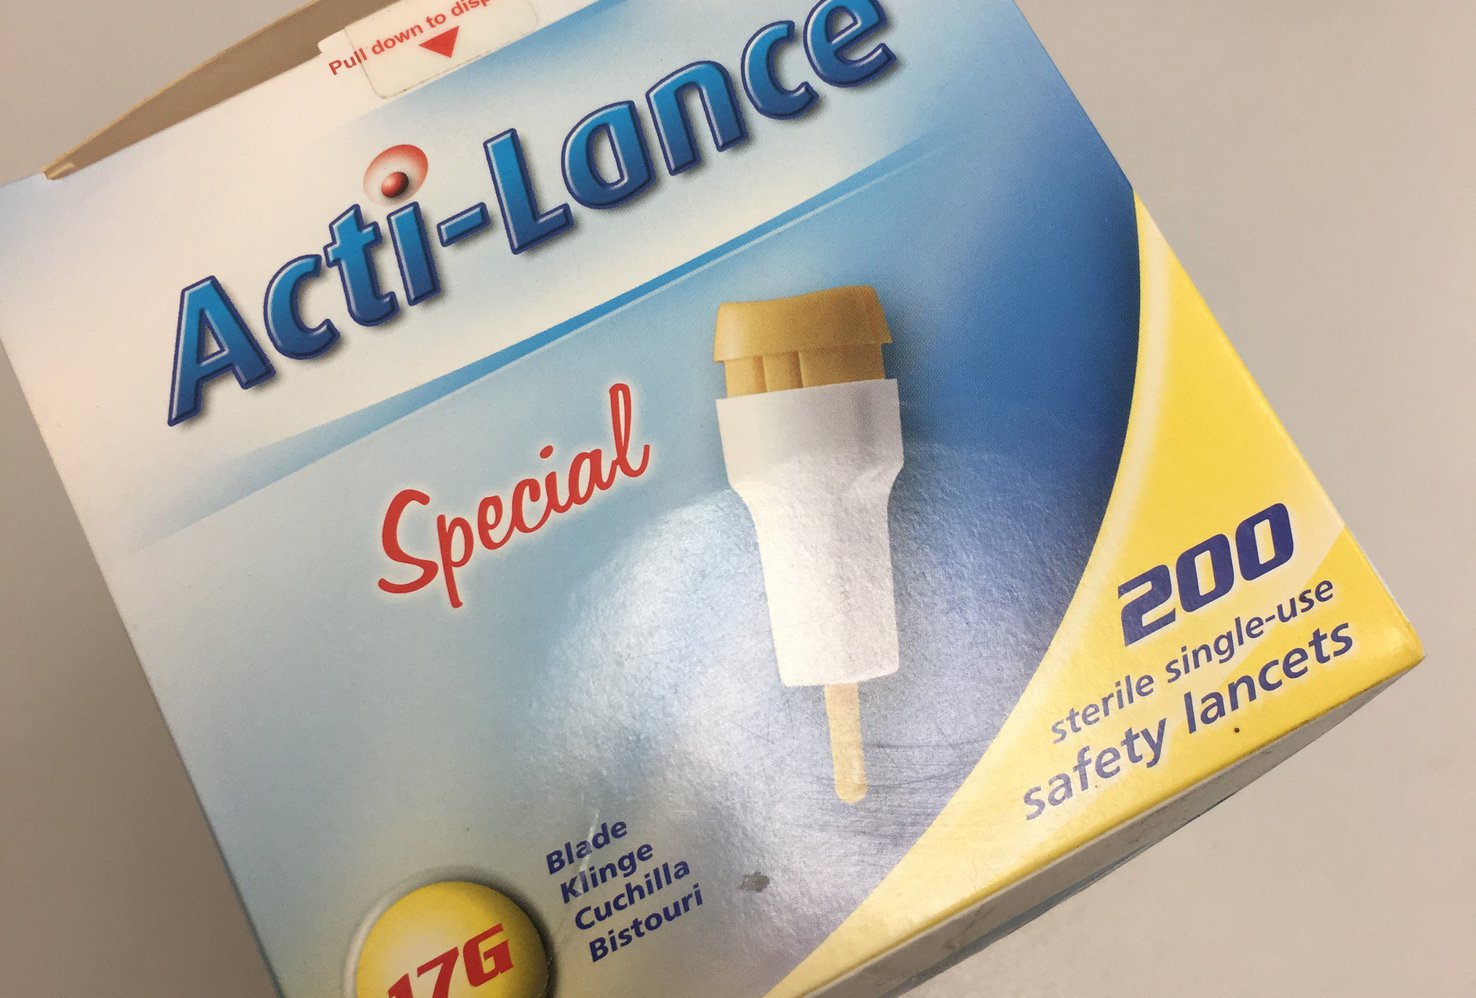 Actilance Lancets Special - YELLOW 200